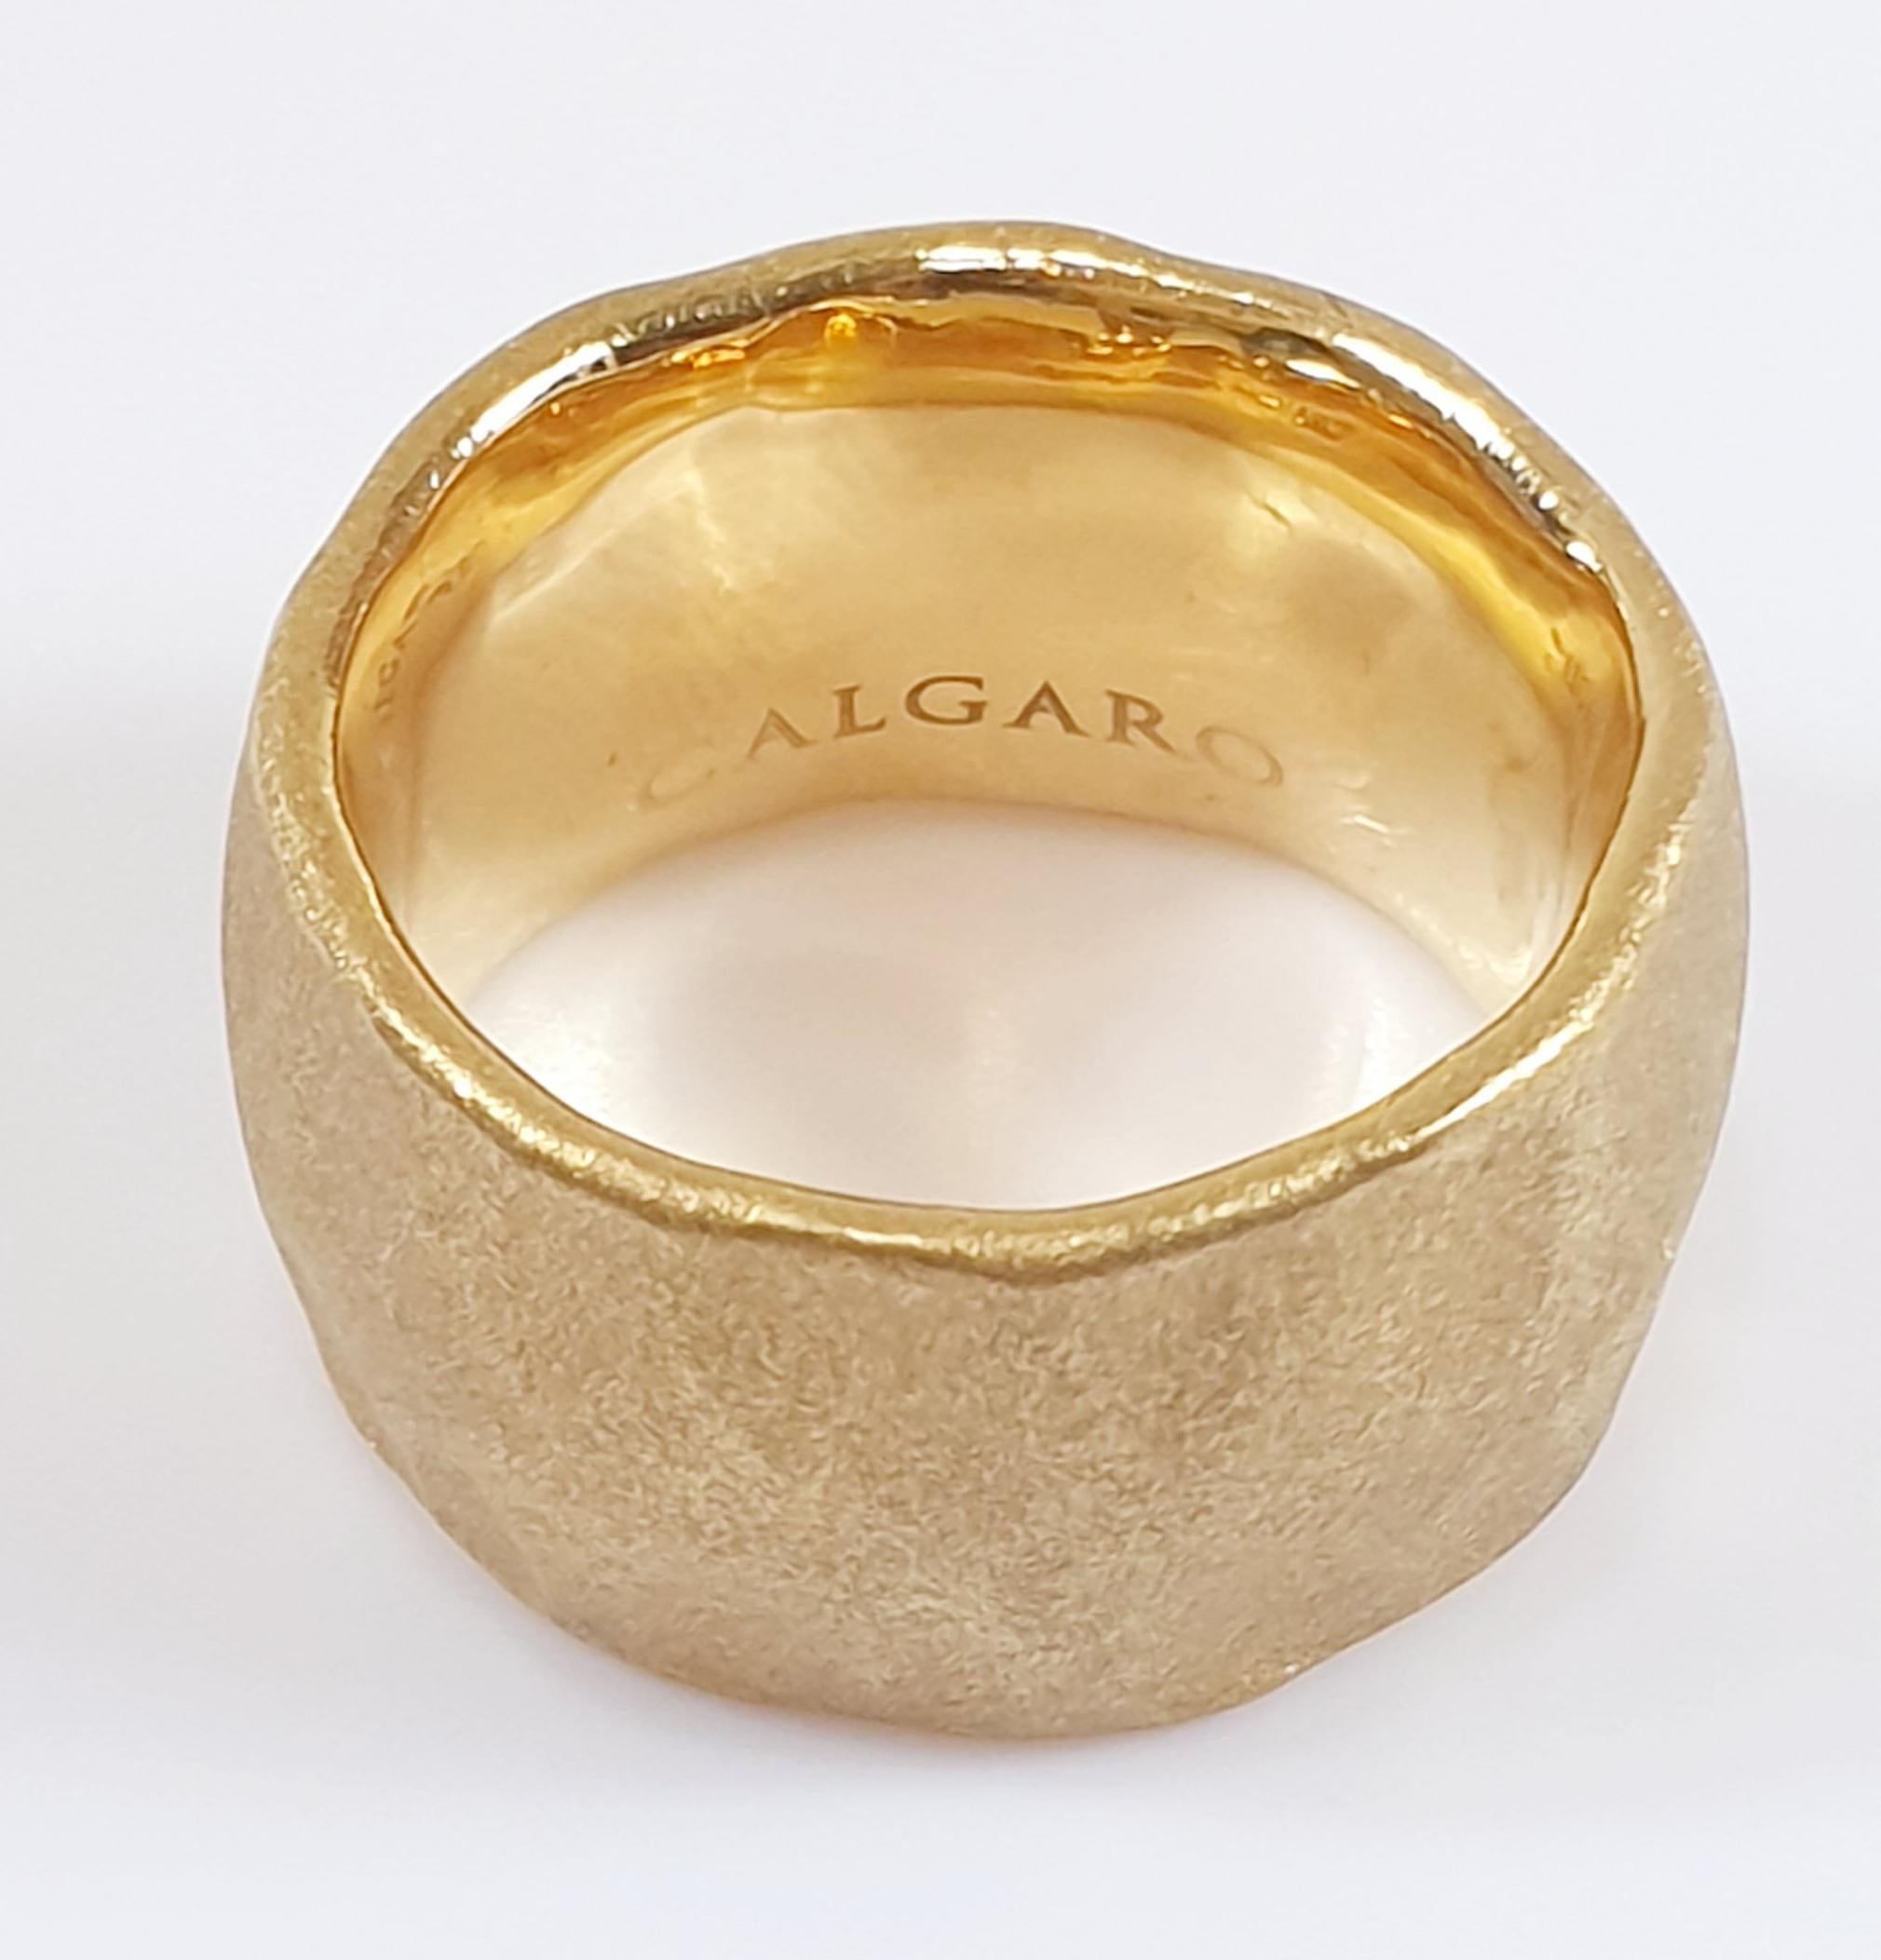 Calgaro Designer Italian 18k Gold 
Unique and rare top Italian designer Calgaro made very few Full 18kt Gold 
Satined martelé yellow gold exterior, polished bright yellow gold interior
Sensual and assertive statement ring 
This ring  is in excellent